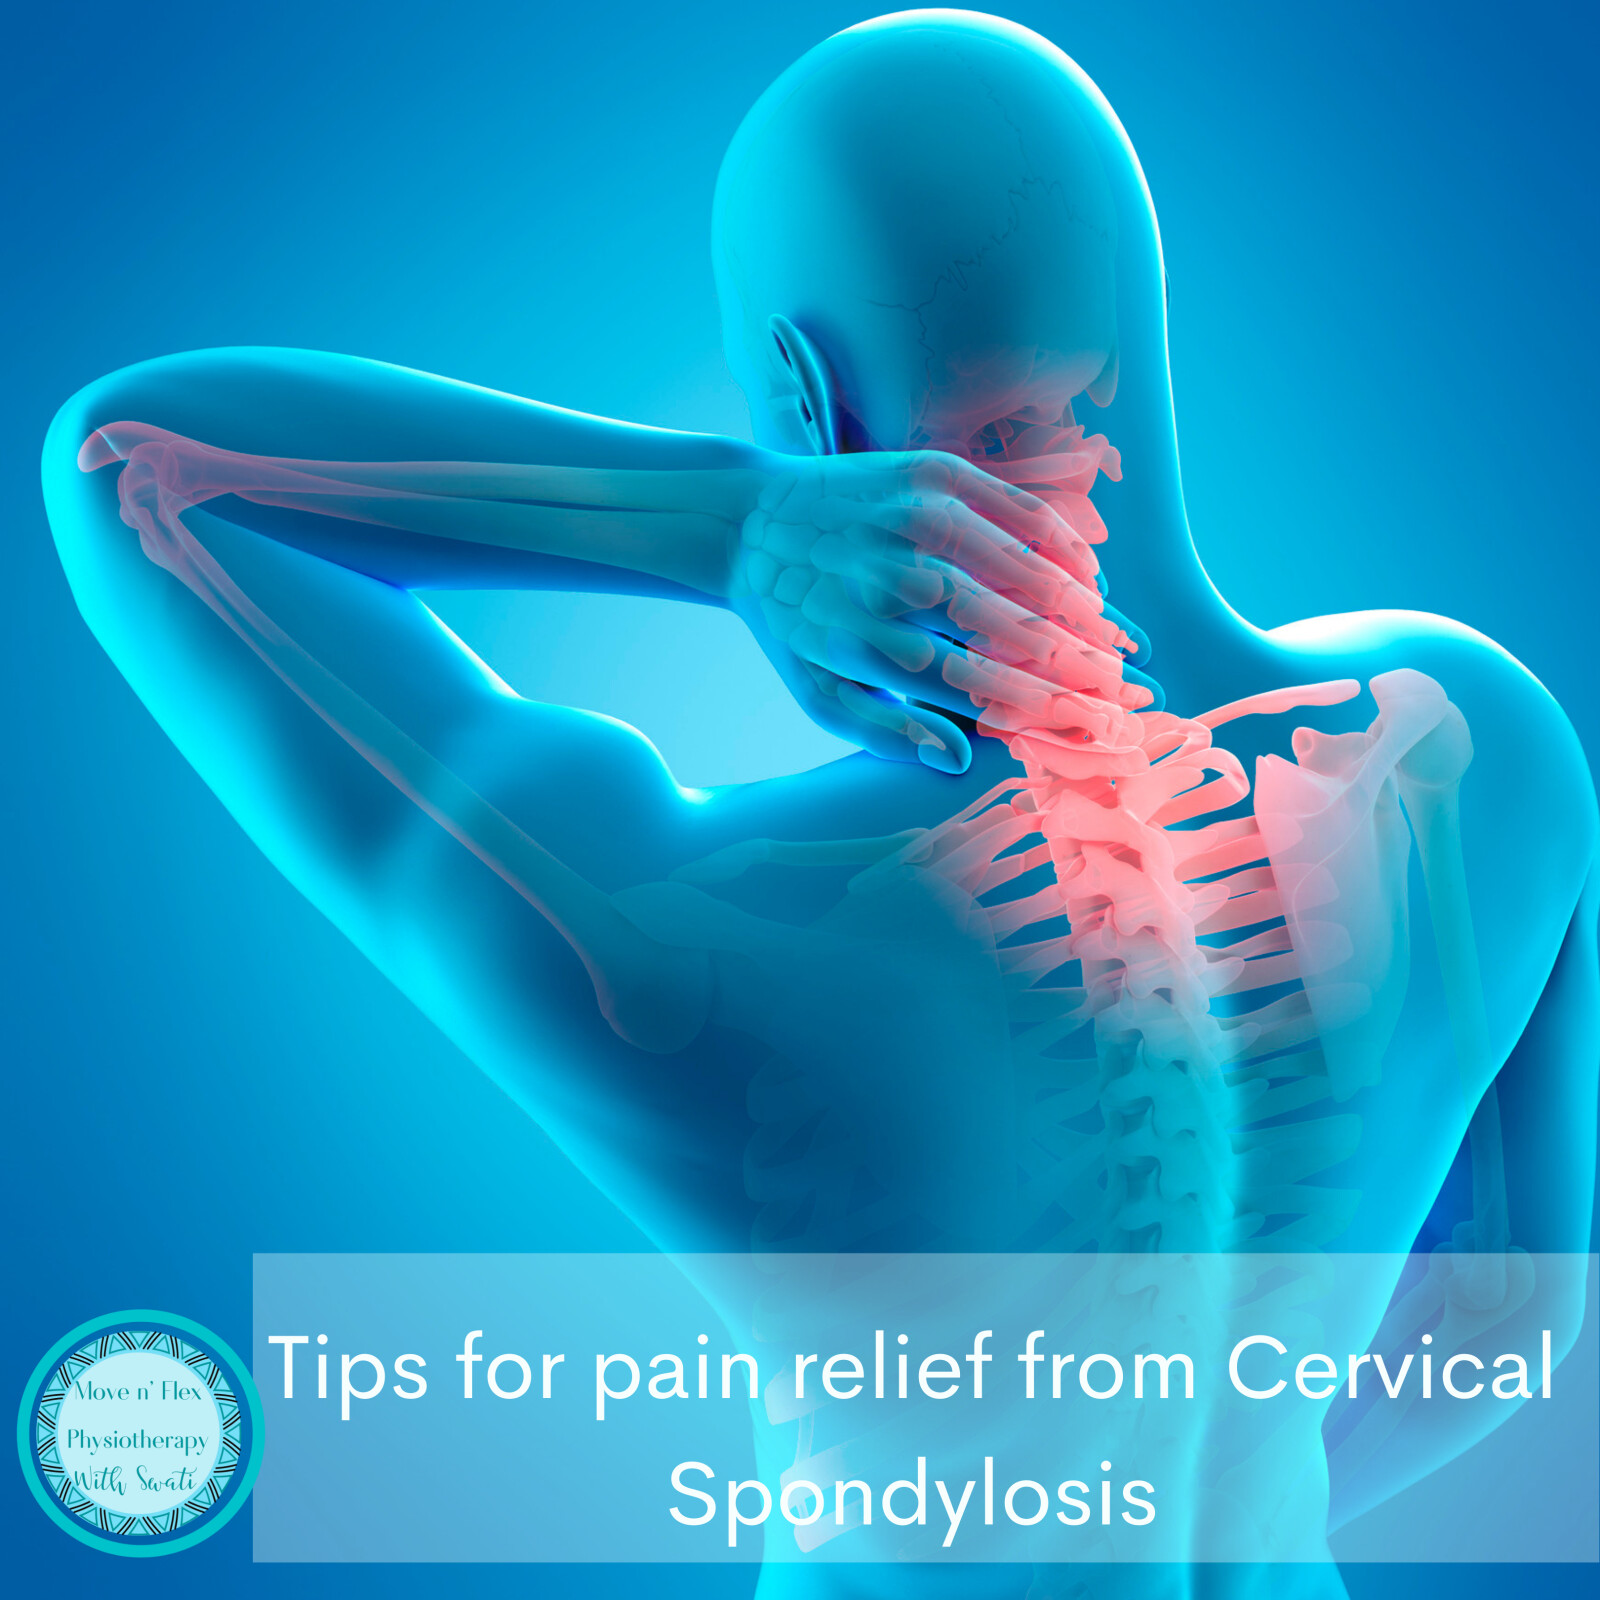 Easy tips for pain relief from Cervical Spondylosis (neck pain)